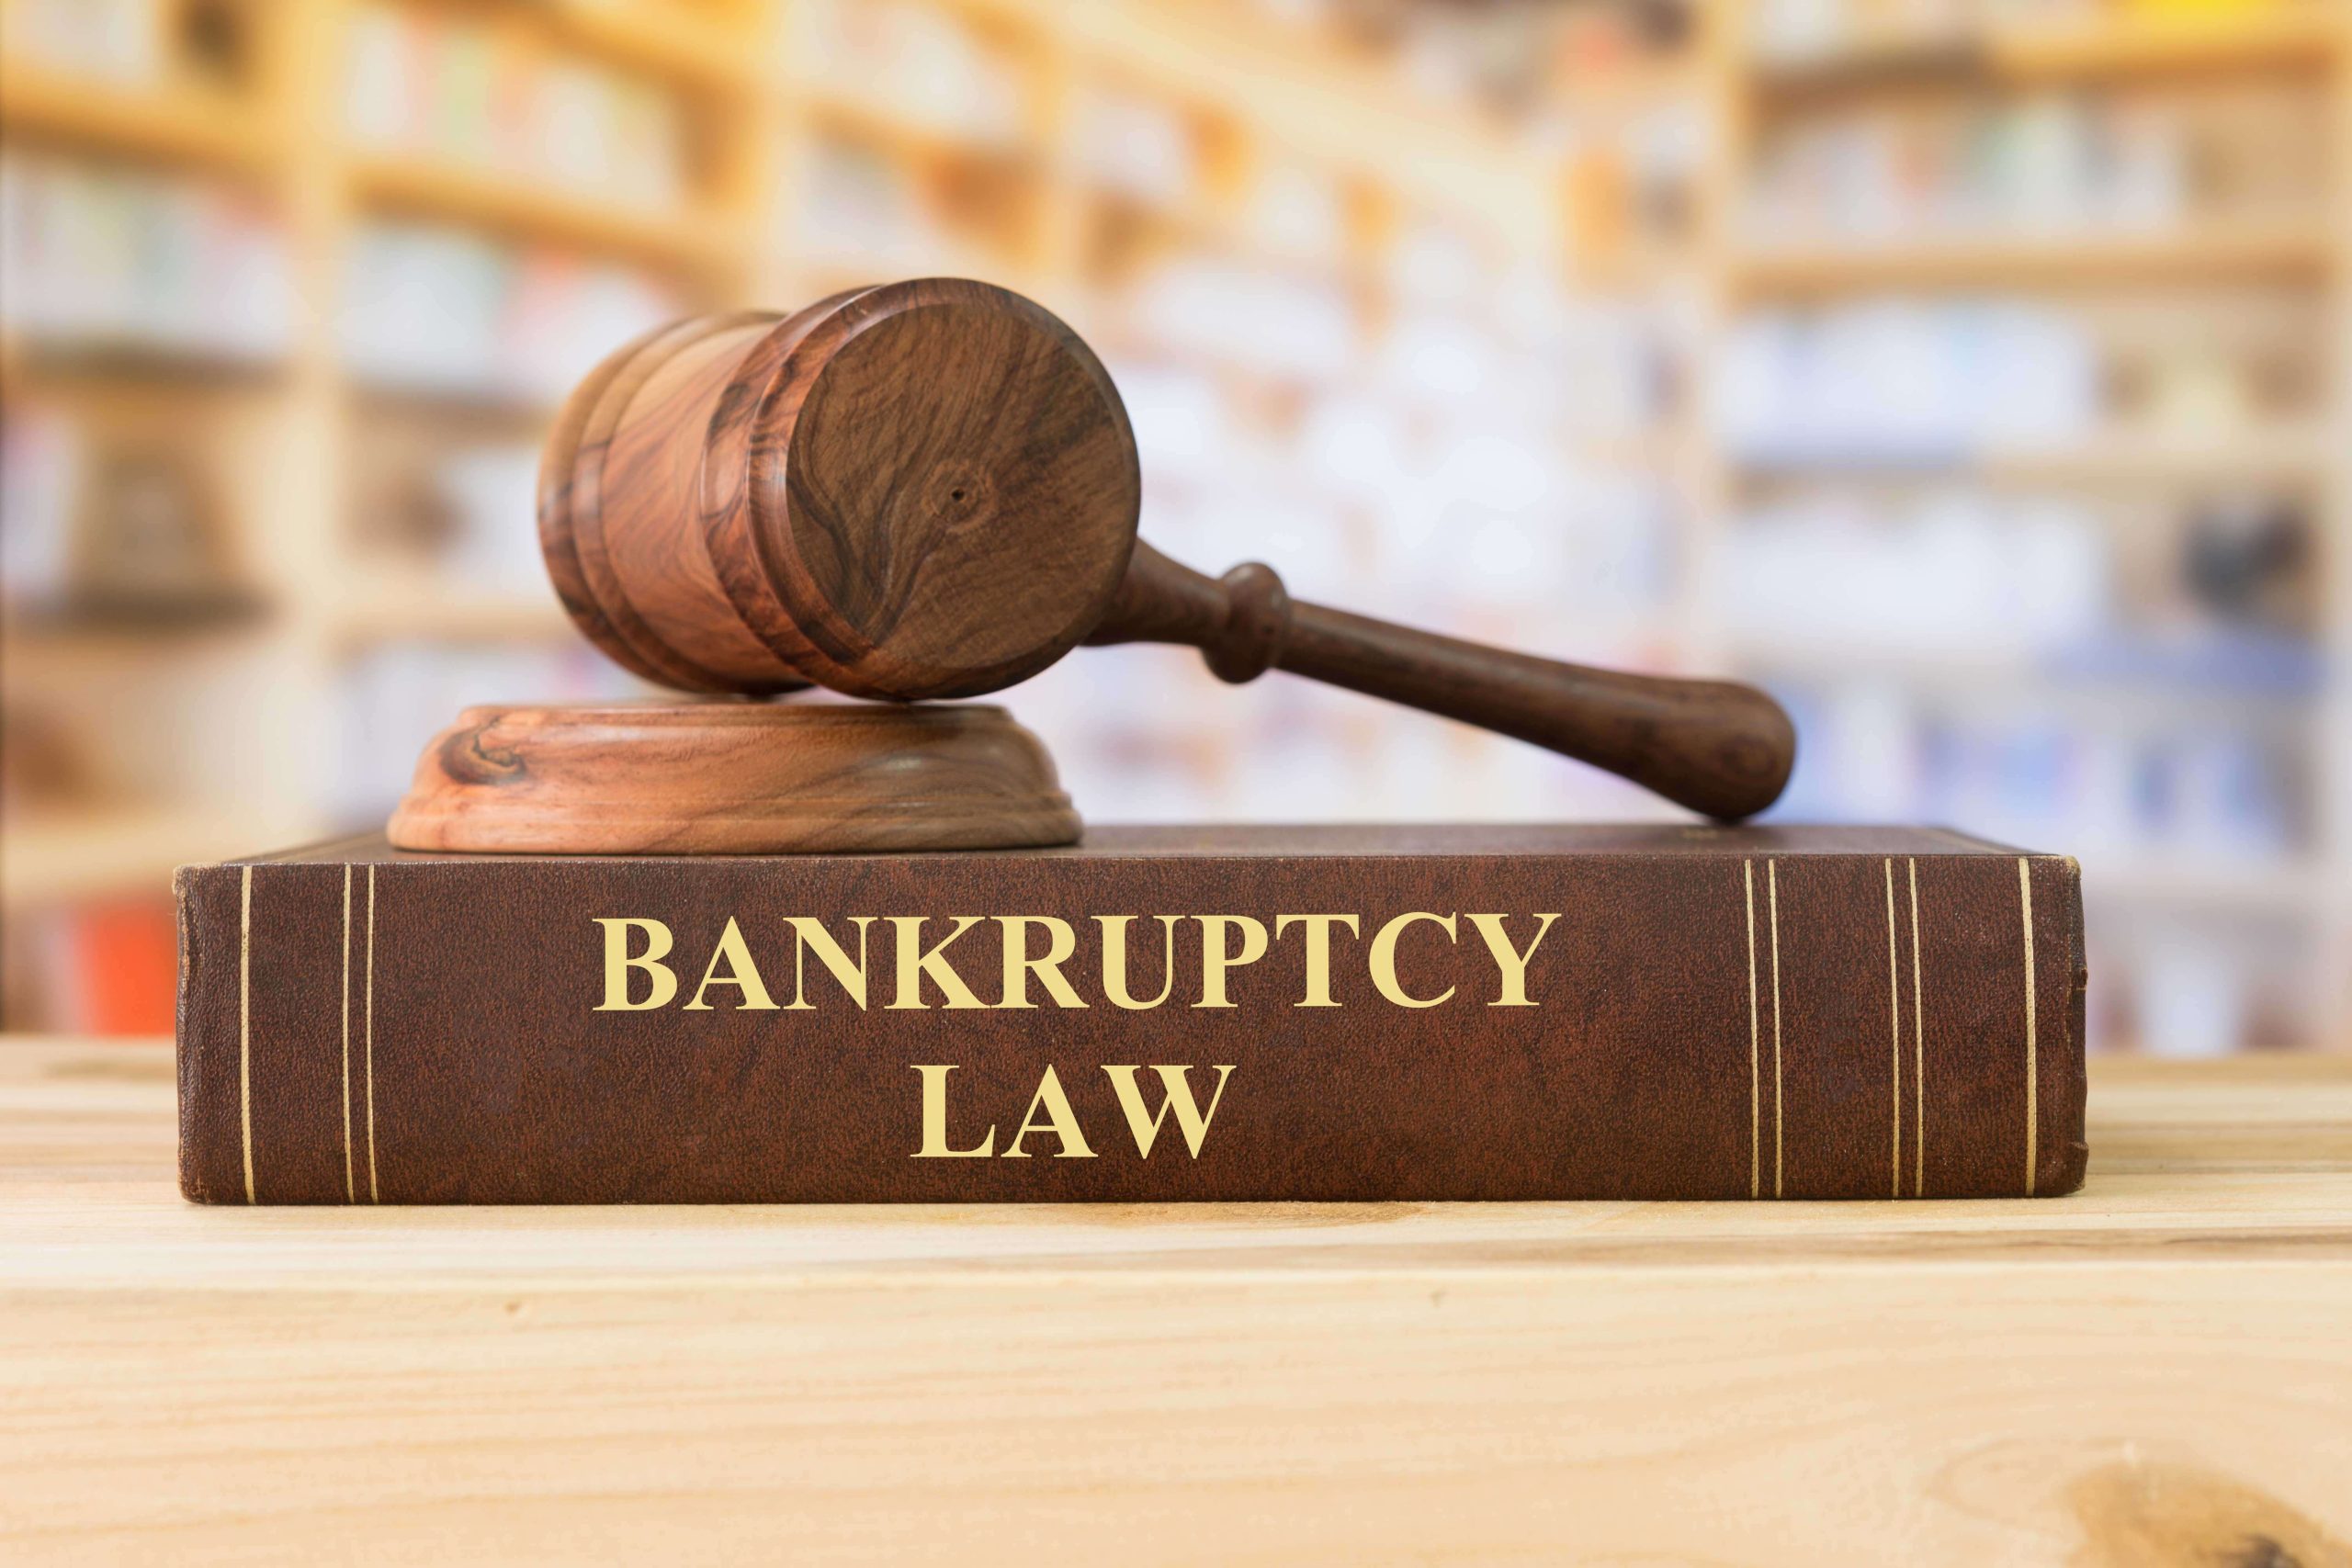 Find a trusted bankruptcy law firm in Port St. Lucie, FL - explore your options